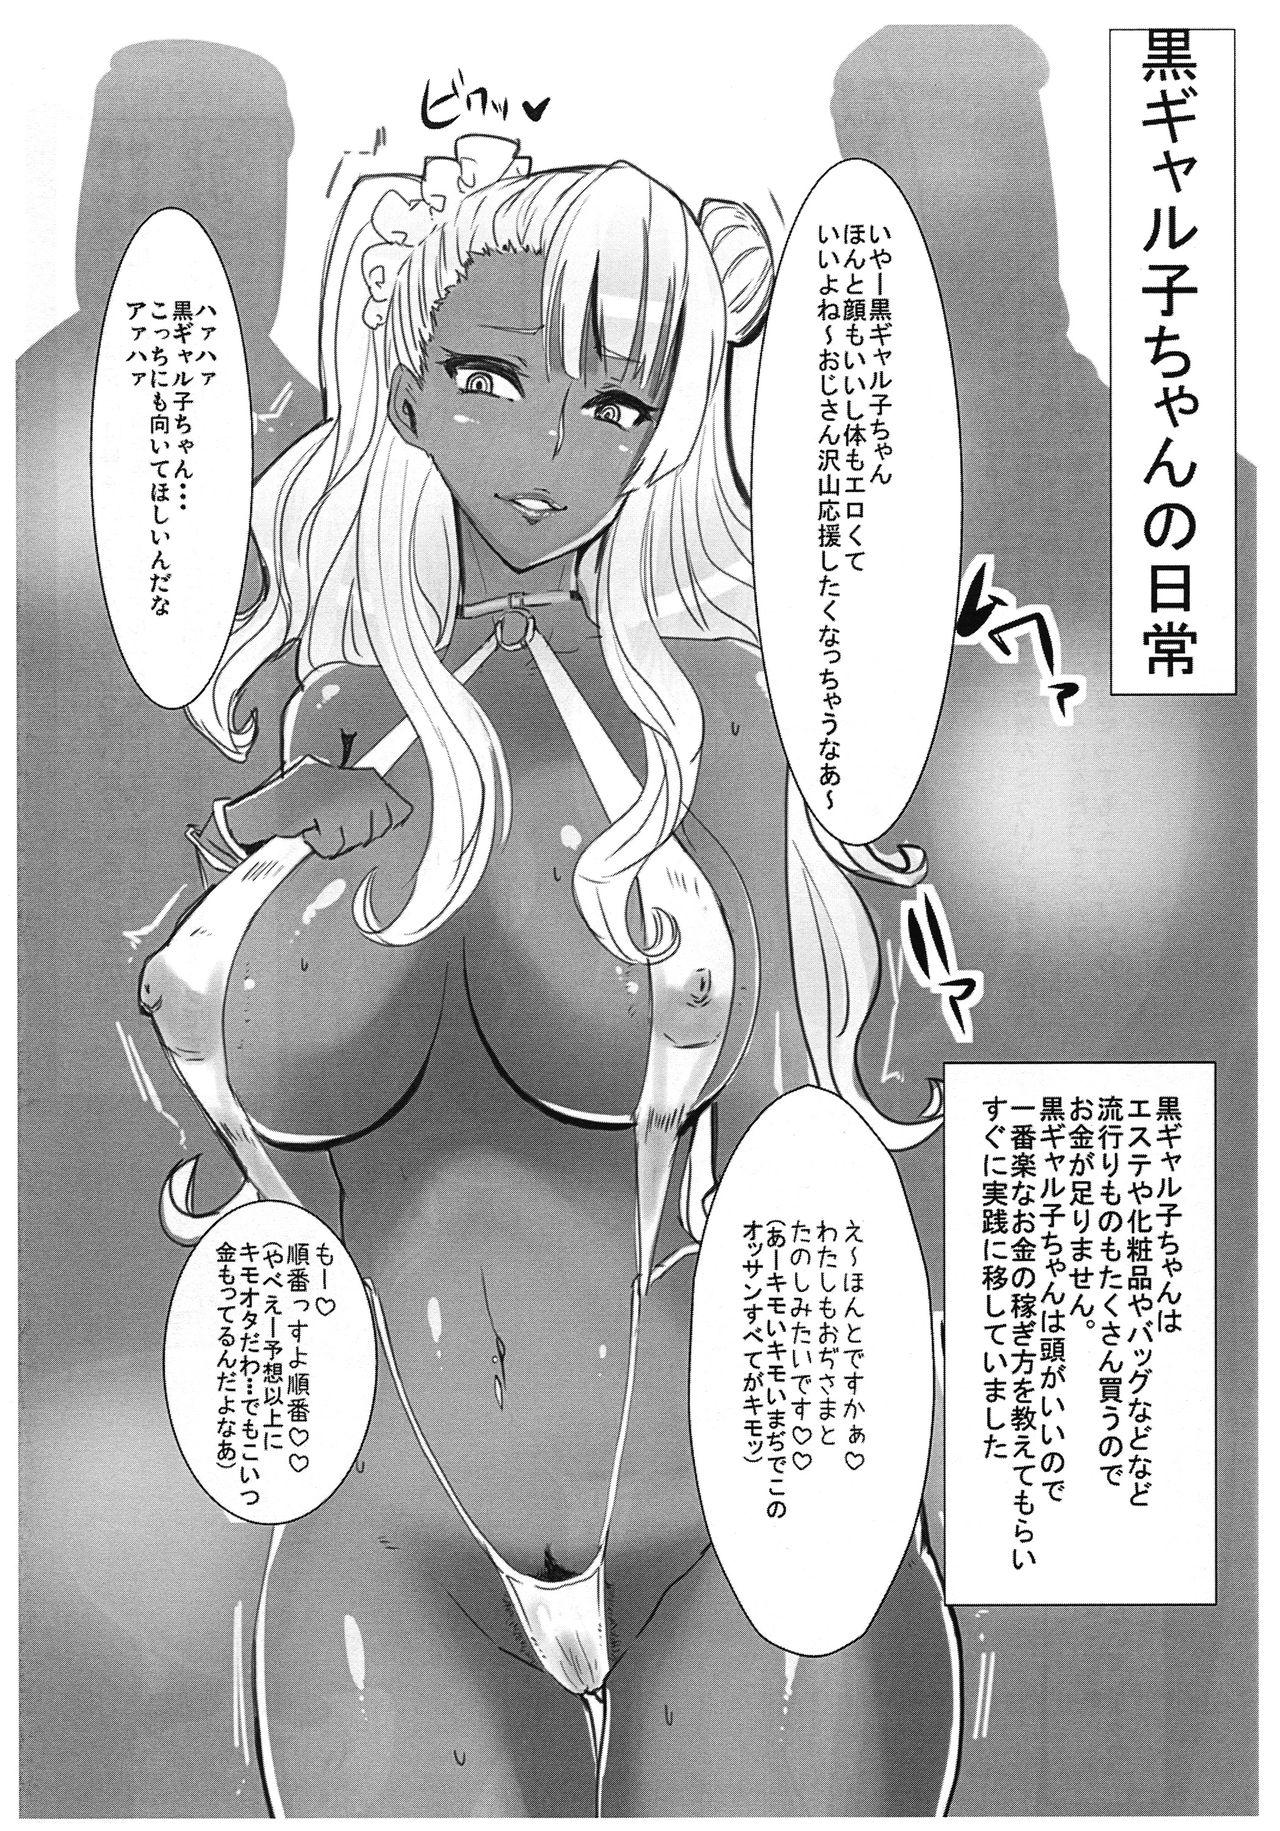 Teenage PROSTITUTE² +VER3.0 - Oshiete galko-chan Cousin - Page 10